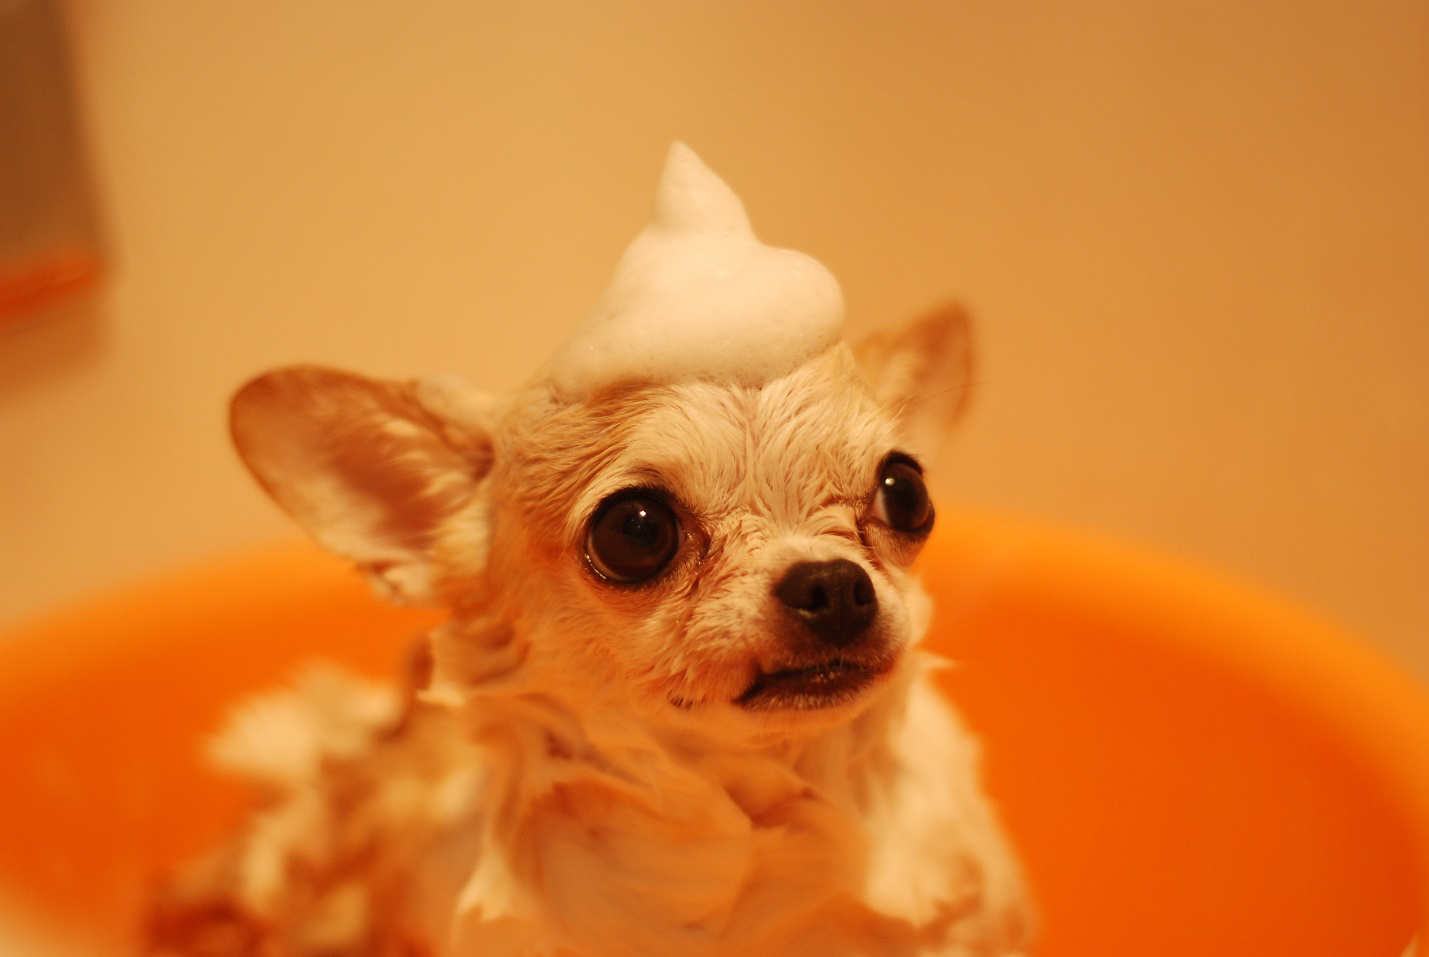 A chihuahua with foam on its head